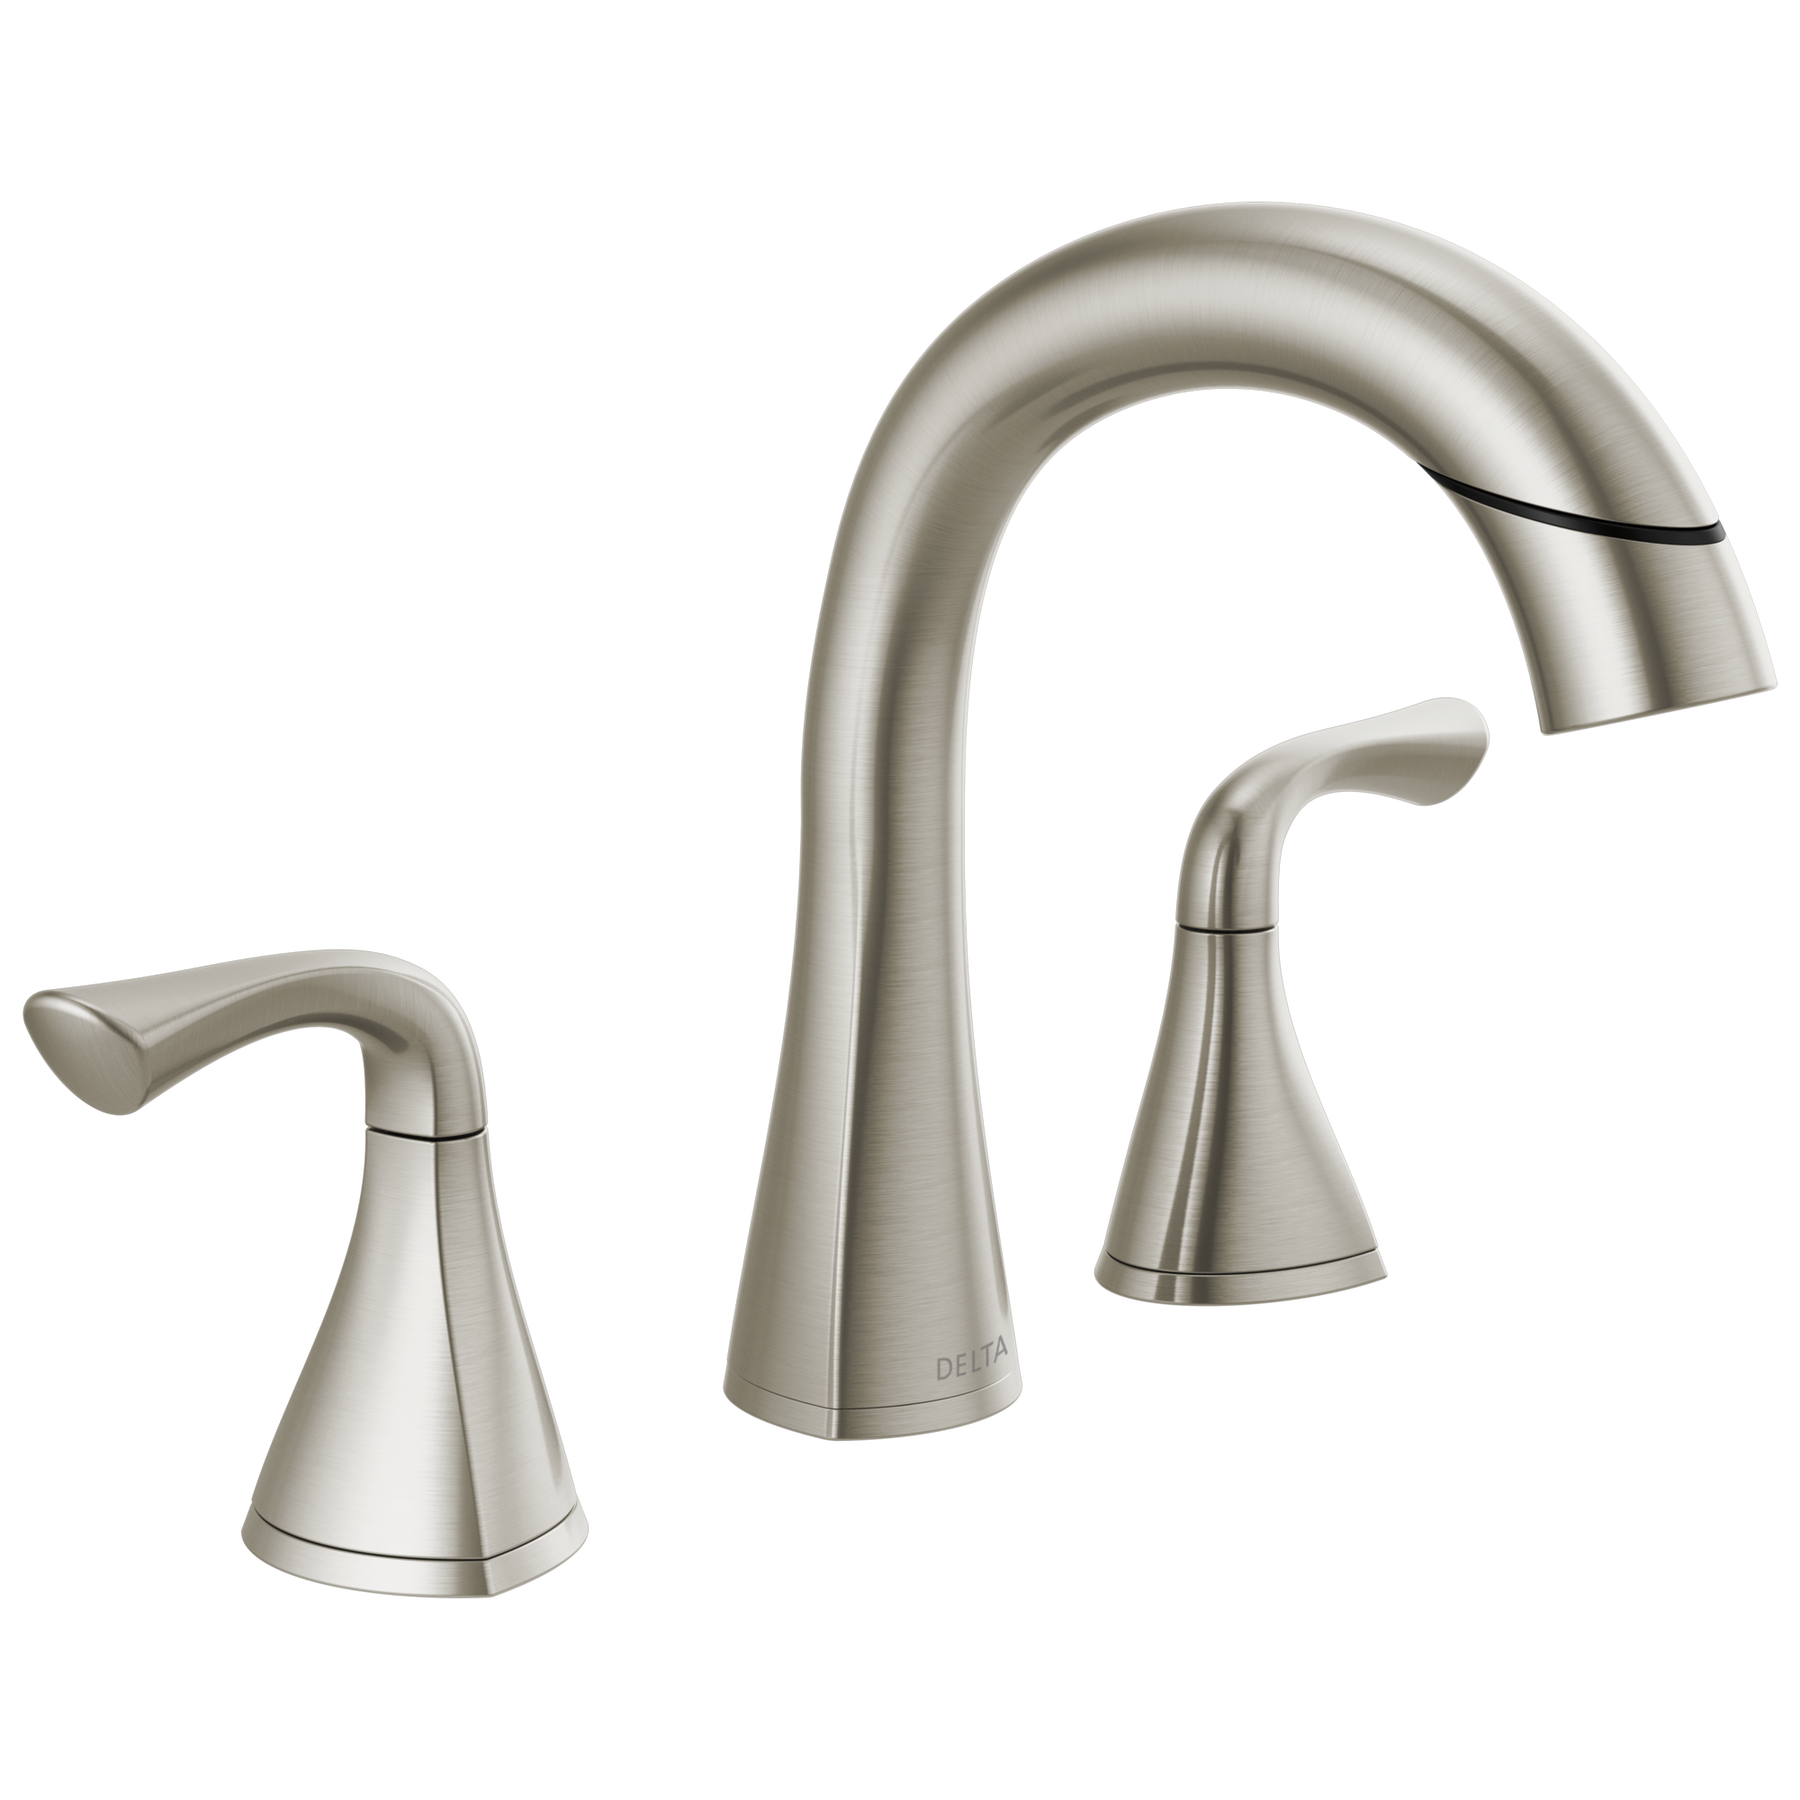 Two Handle Widespread Pull-Down Bathroom Faucet in Spotshield Brushed Nickel  35764LF-SPPD